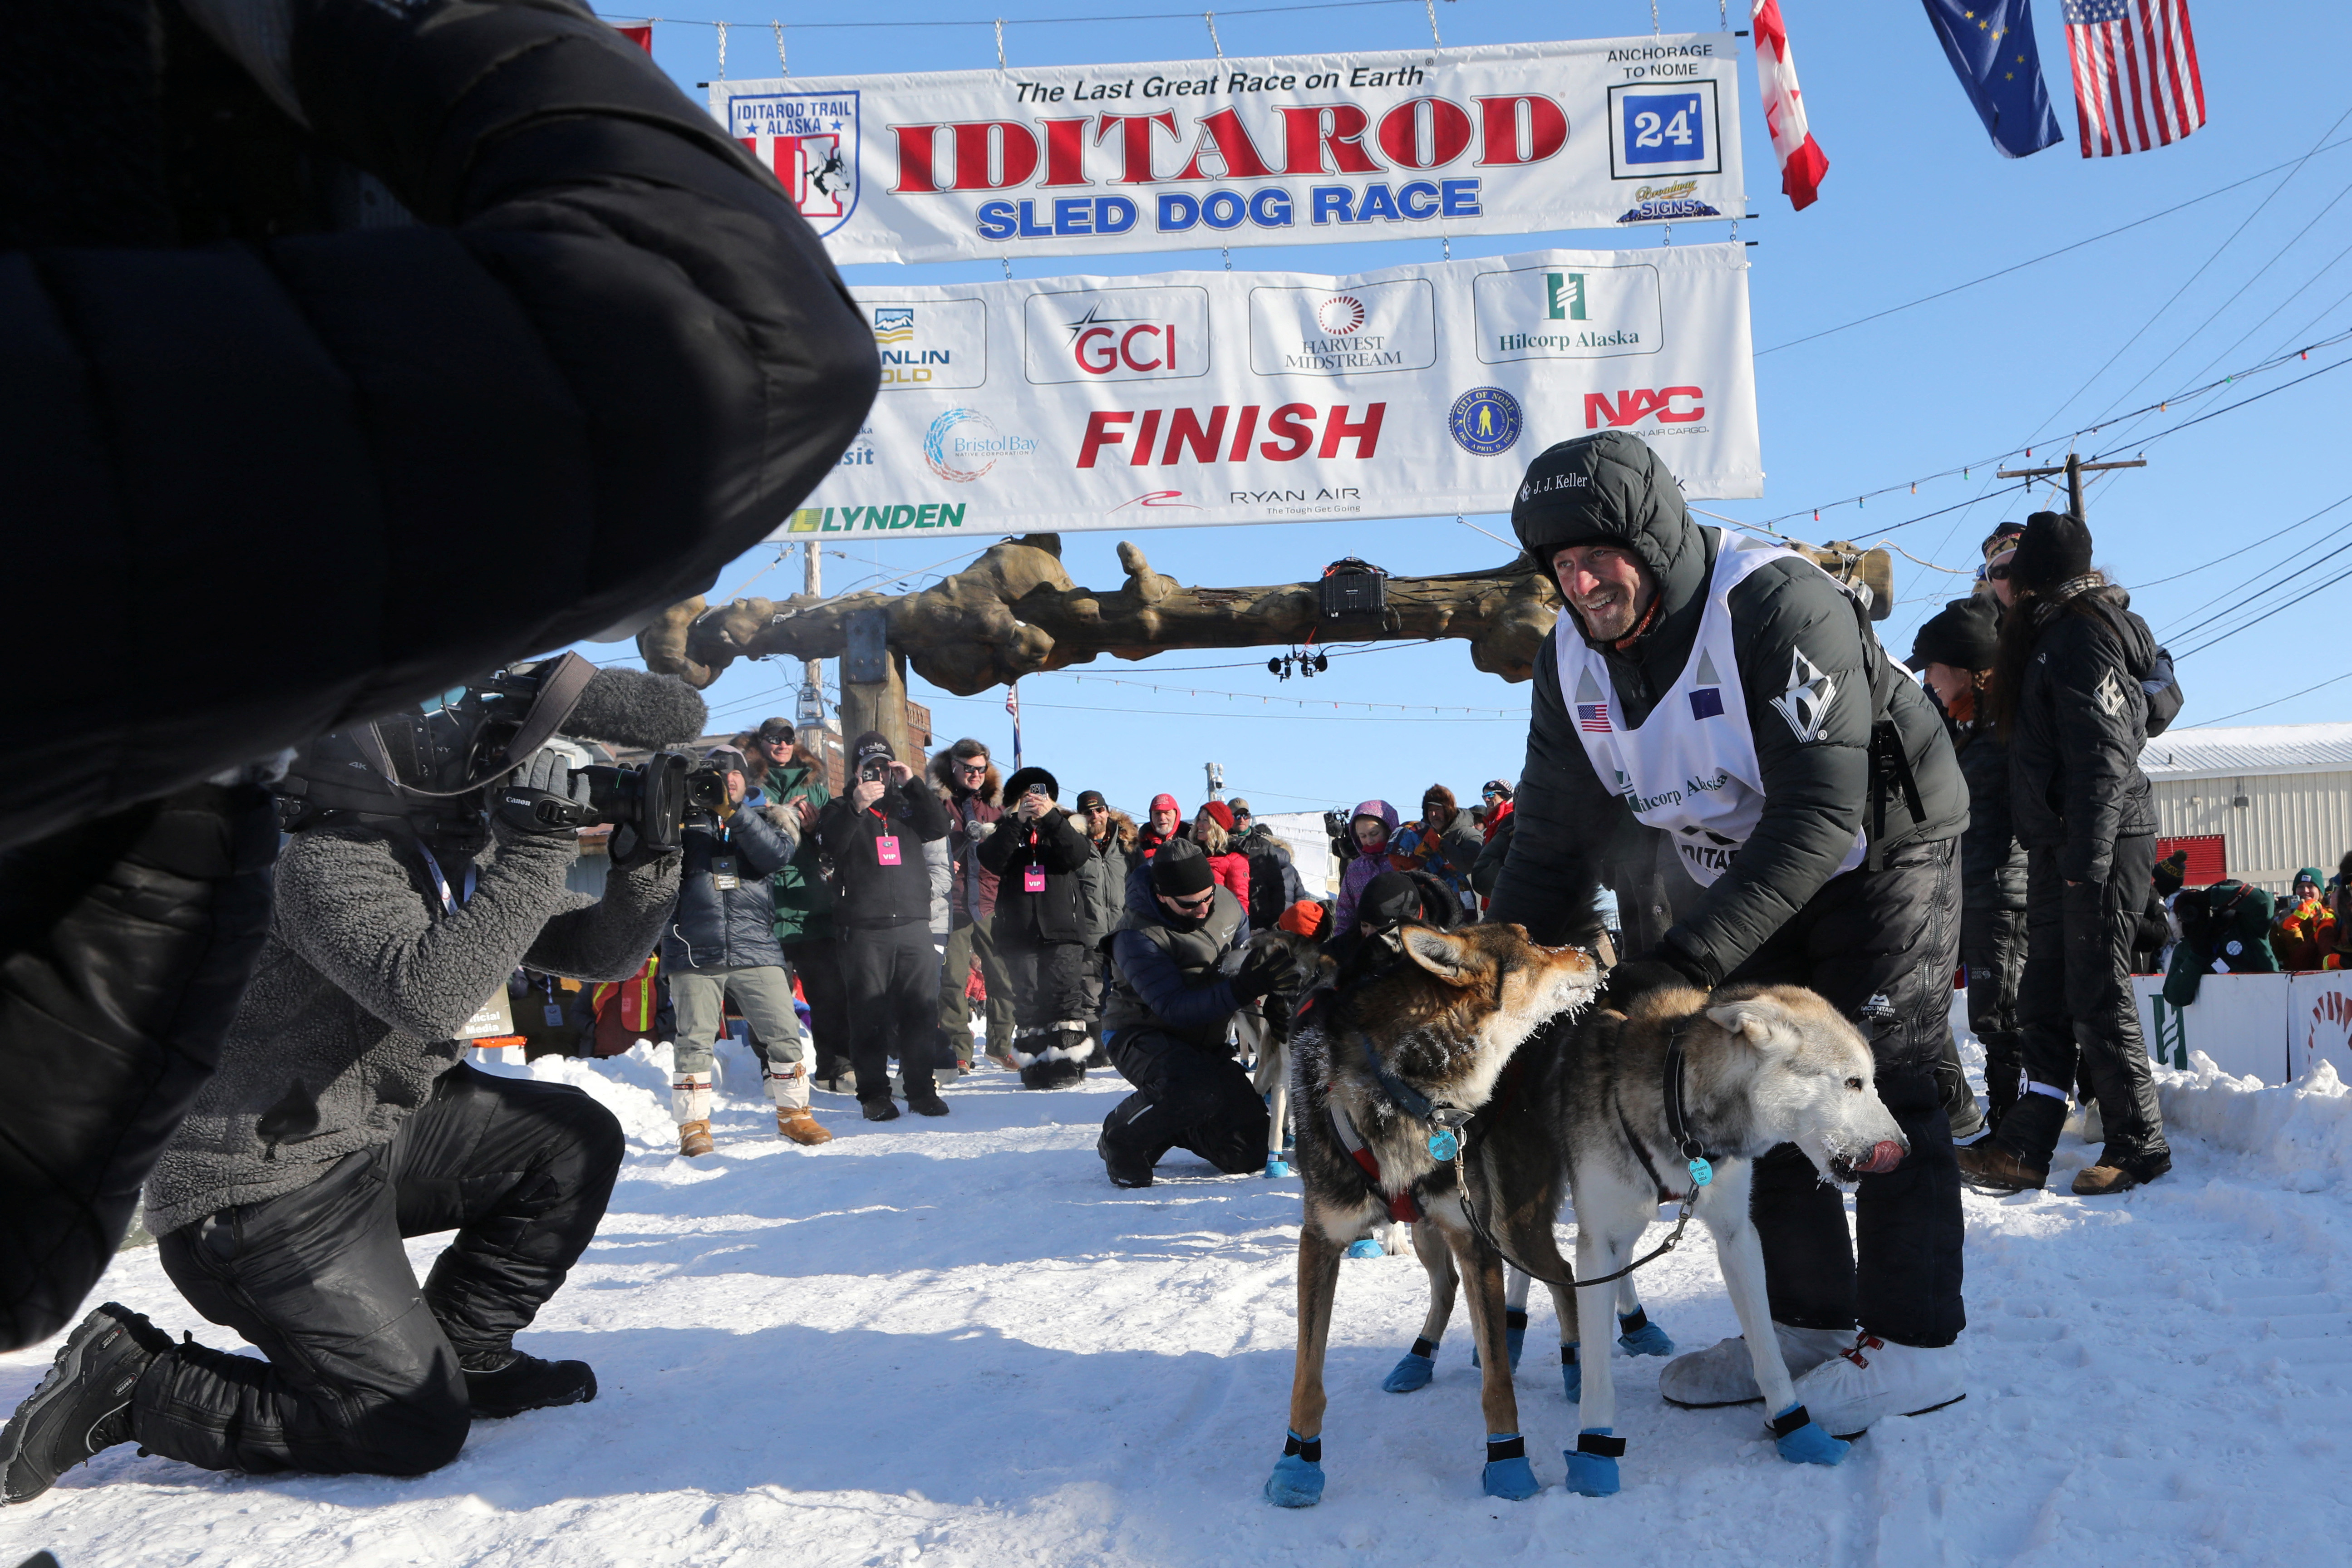 Iditarod champion Dallas Seavey thanks his dog team shortly after winning the 52nd Iditarod Trail Sled Dog Race in Nome